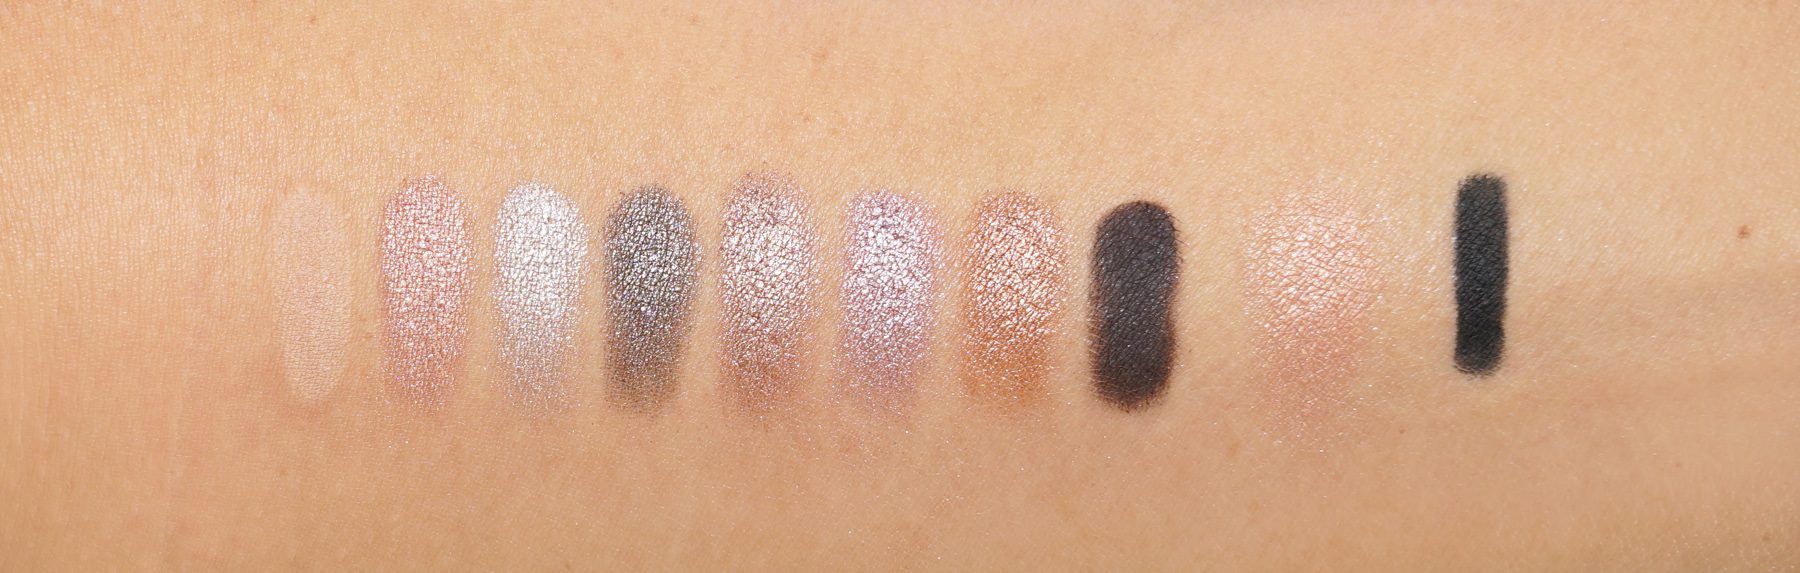 Mac Nordy Girl Metallic Set Lip Trio Nude And Lip Trio Pink Review The Beauty Look Book